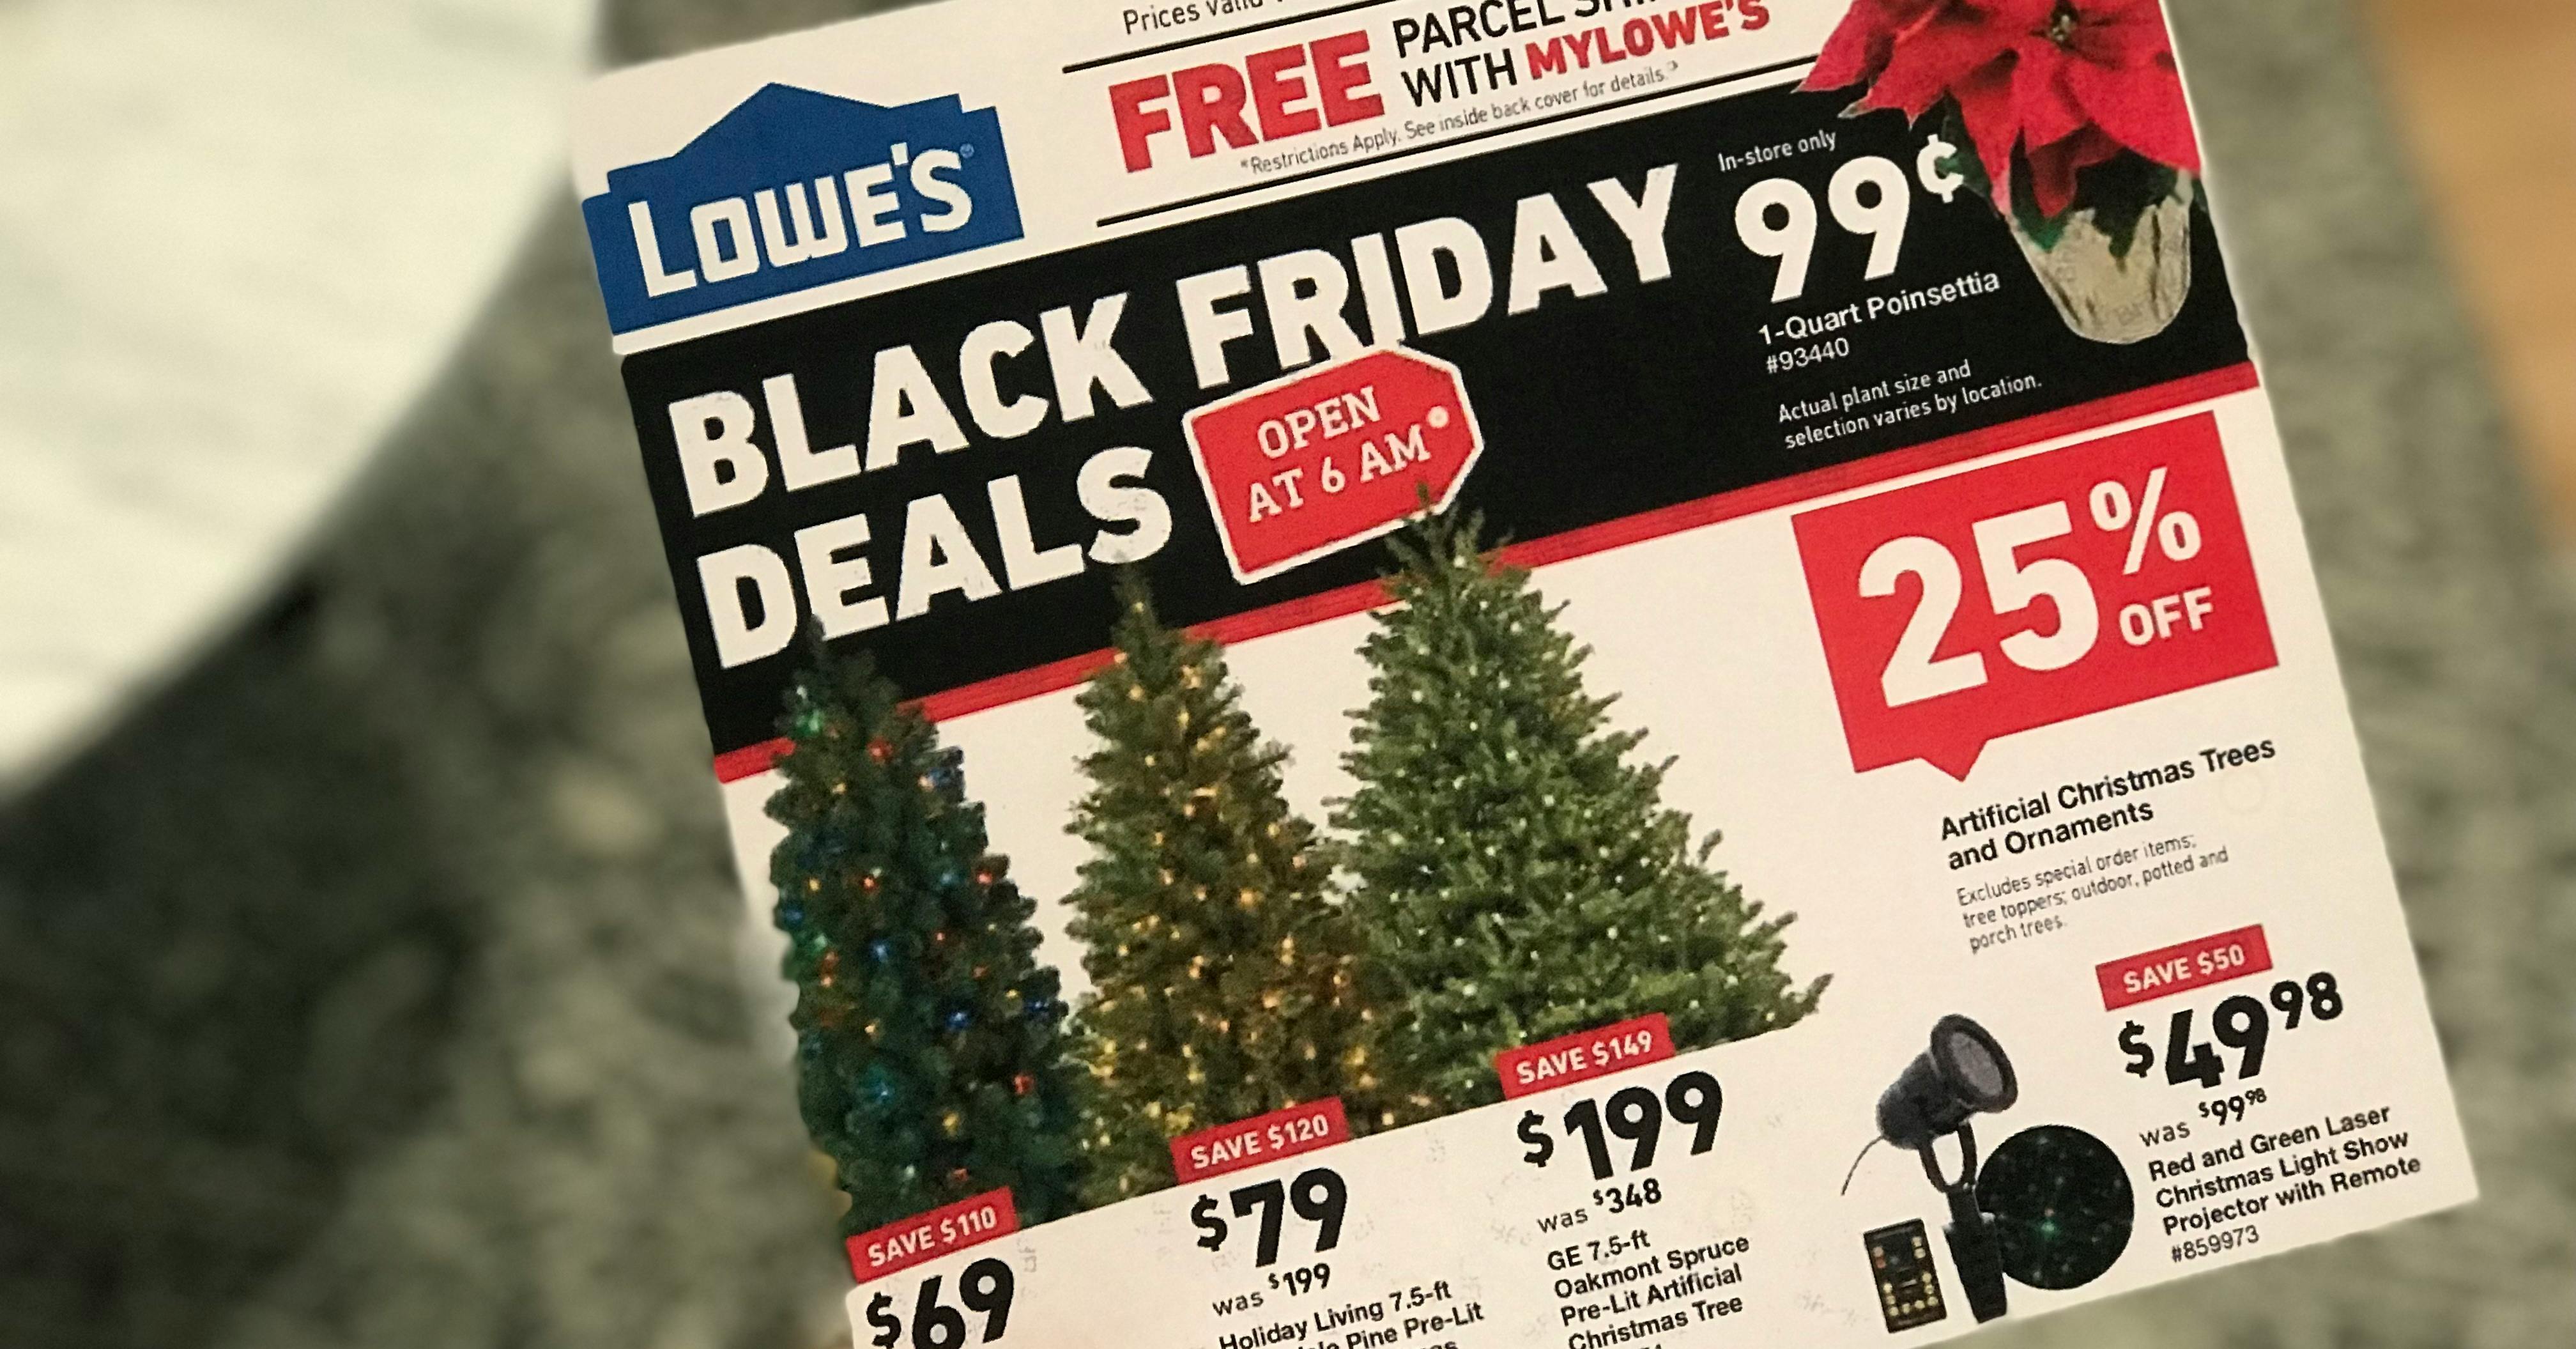 Top 20 Lowe's Black Friday Deals for 2018! - The Krazy Coupon Lady - What Not To Buy On Black Friday Krazy Coupon Lady